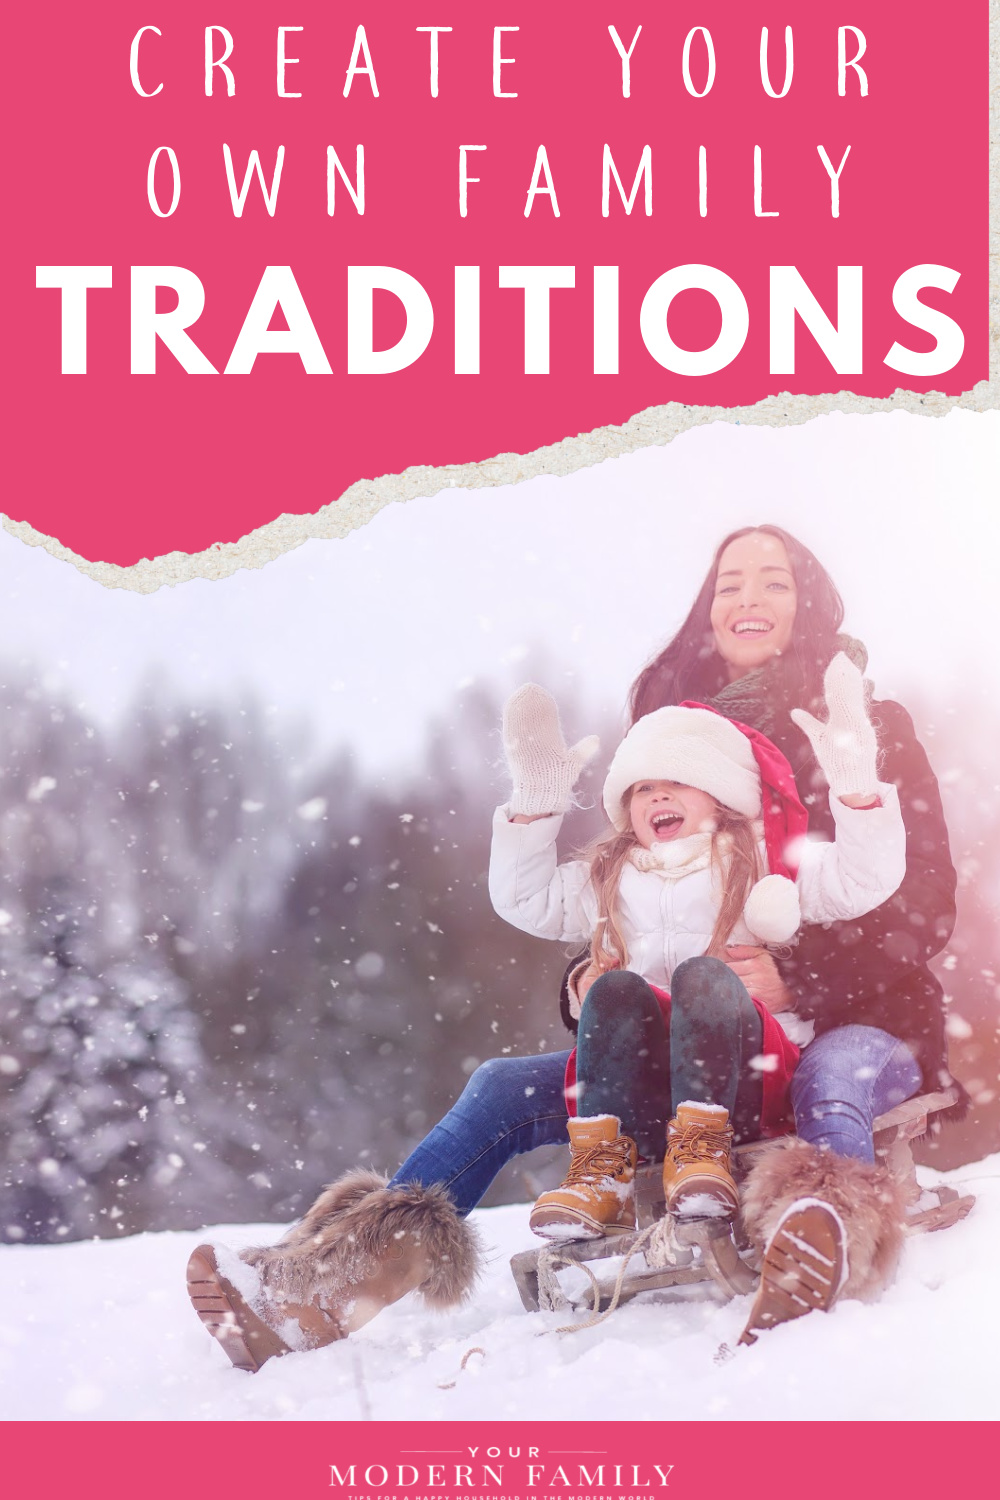 creating family traditions like sled riding 